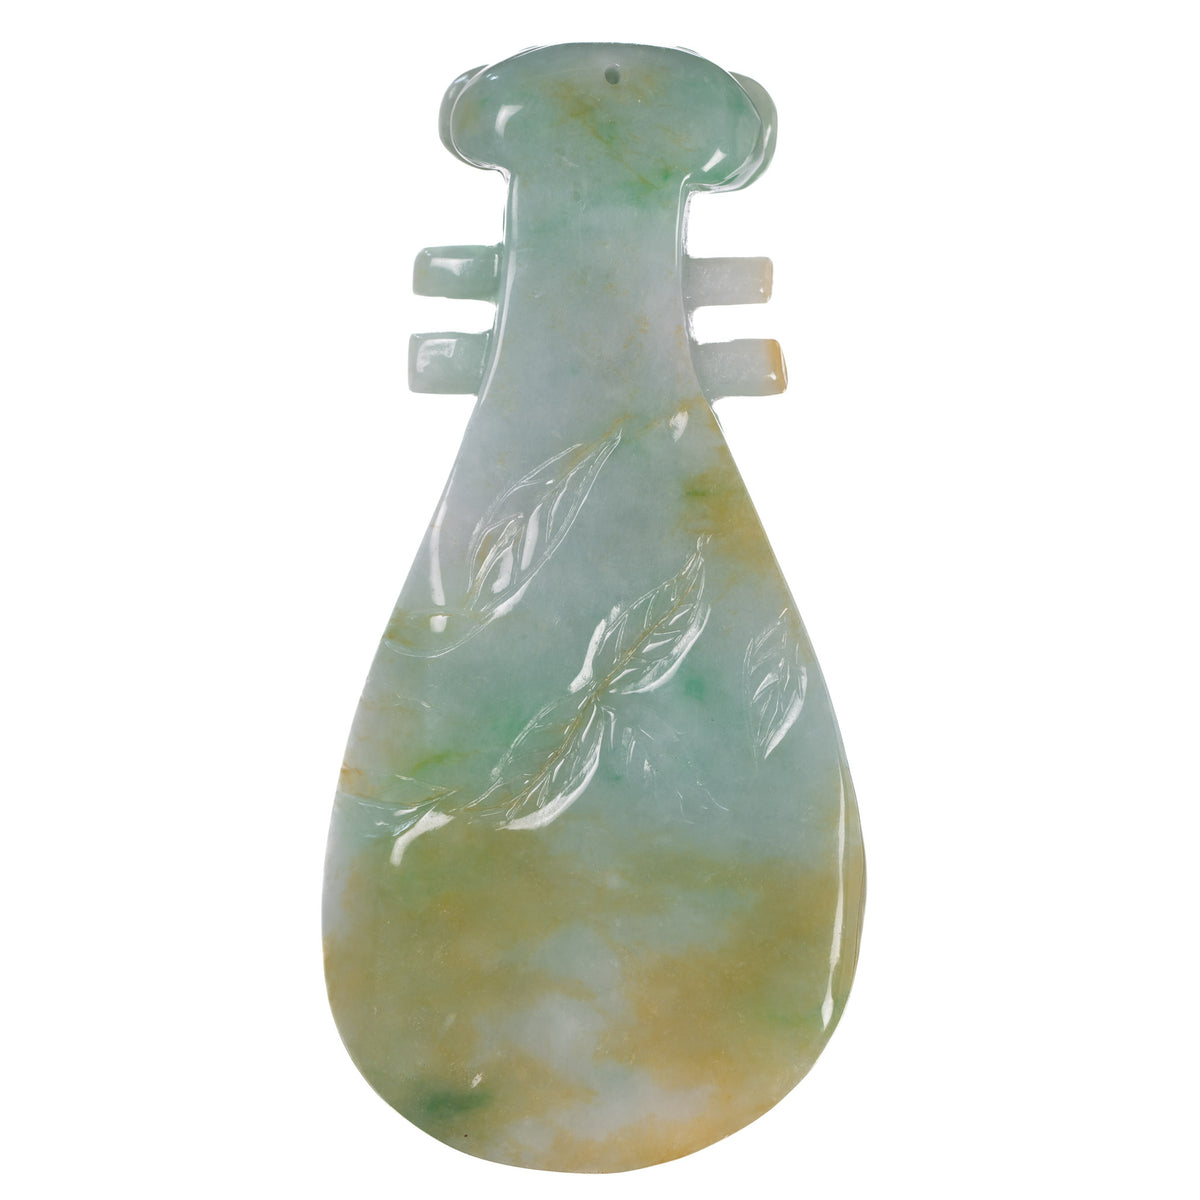 Carved Jade Musical Instrument Pipa Pendant with Flowers and Birds